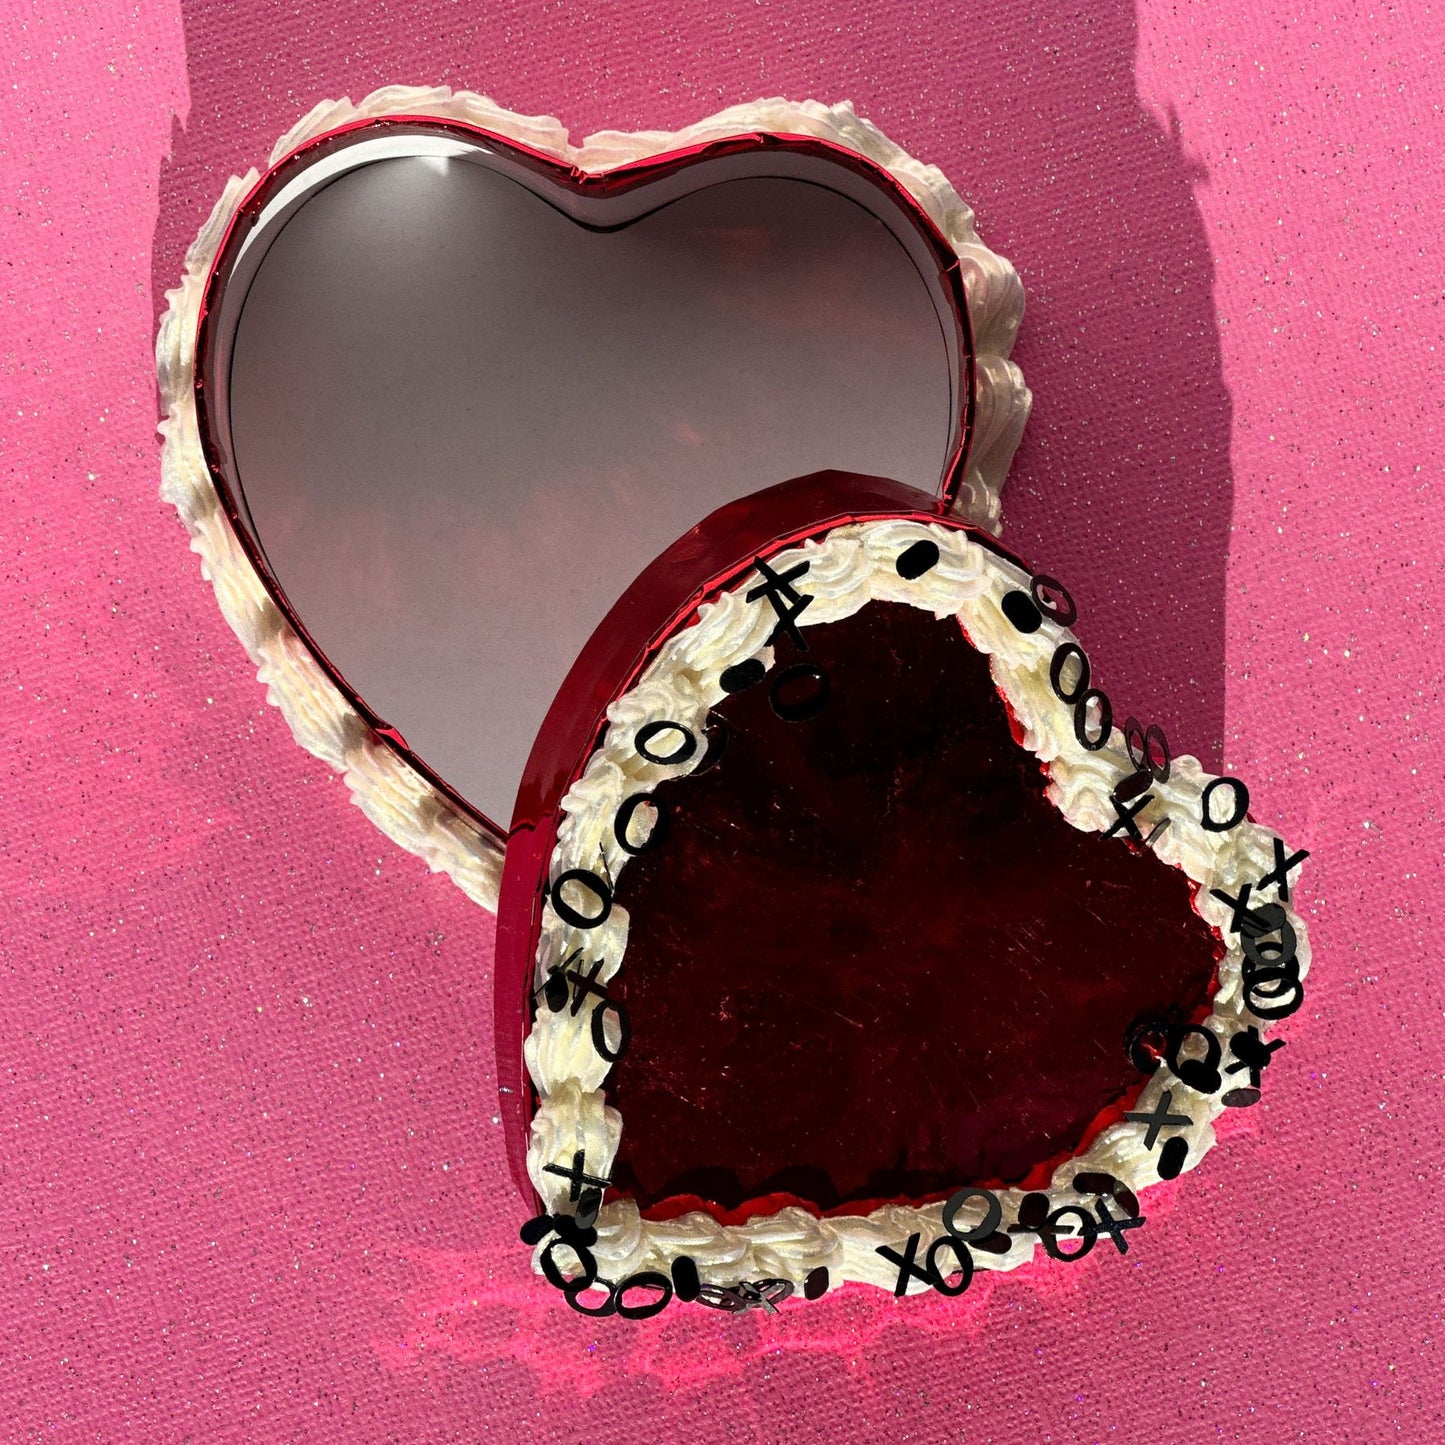 3D Painted Cake - Heart Box Red Metallic With Pearl "Frosting" and Black XO Glitter